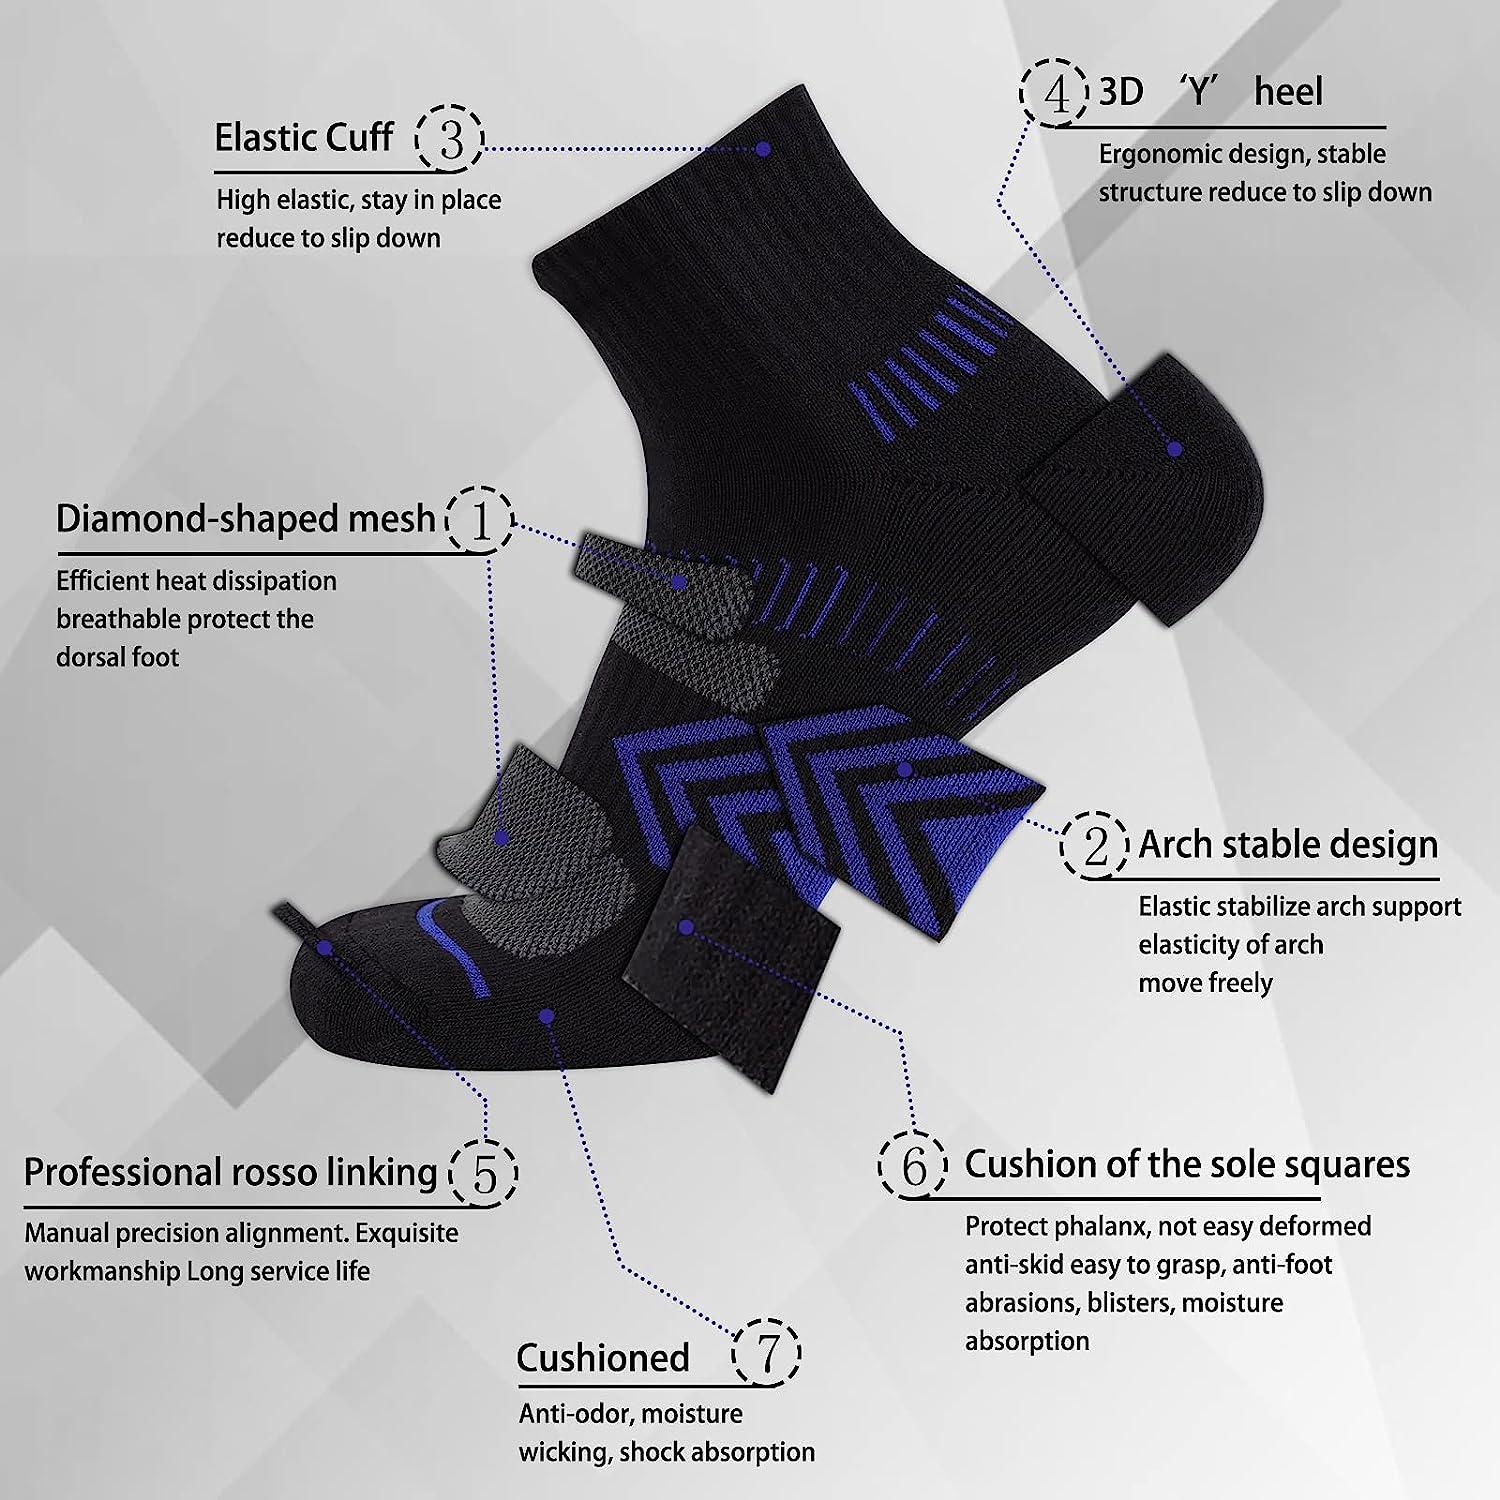 COOPLUS Men's Athletic Ankle Socks Mens Cushioned Breathable Low Cut Socks  6 Pairs